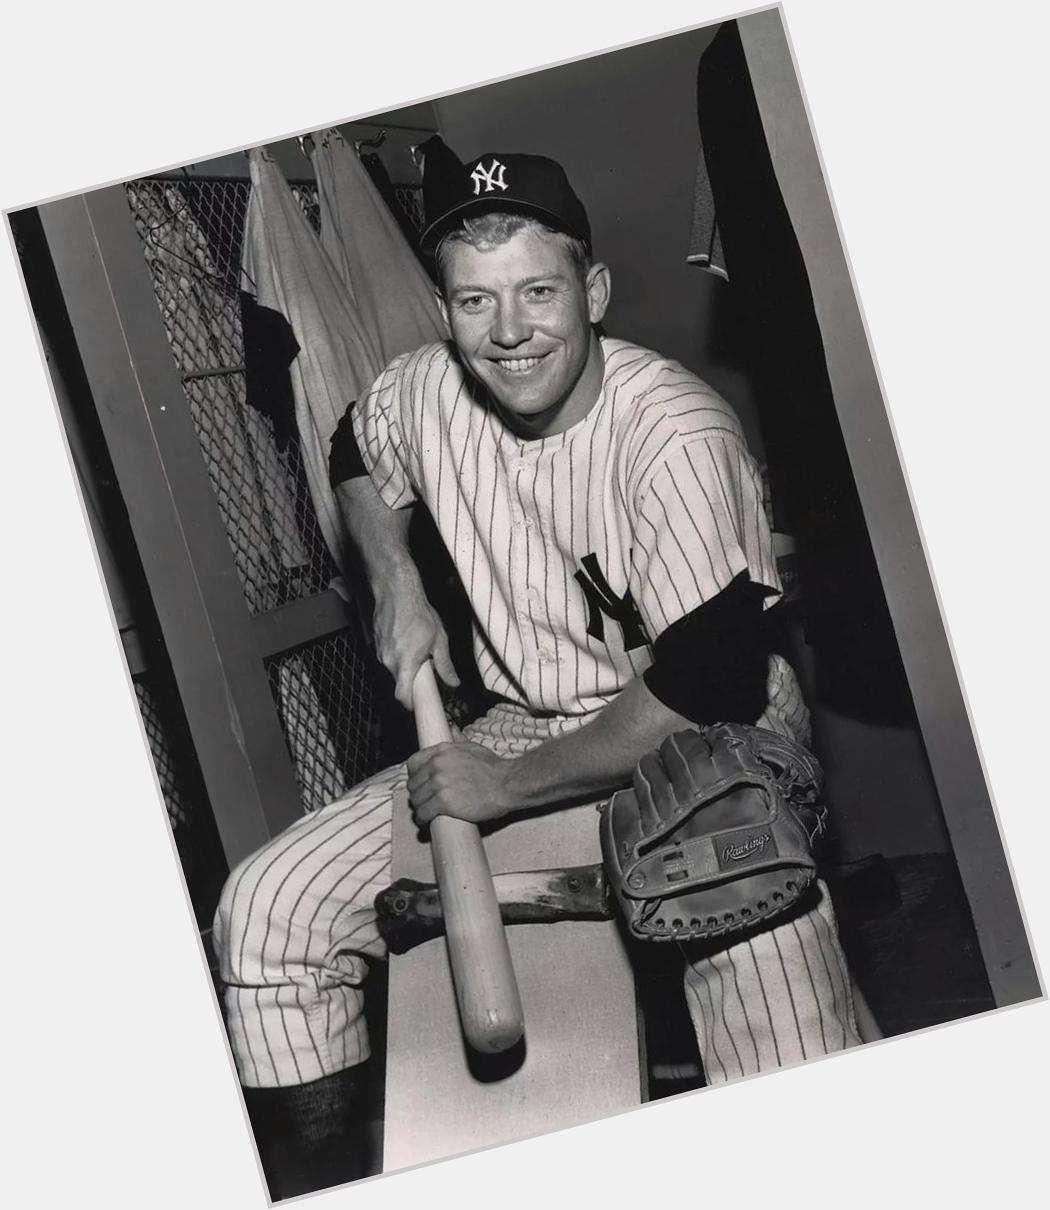 Happy 84th birthday to Mickey Mantle 